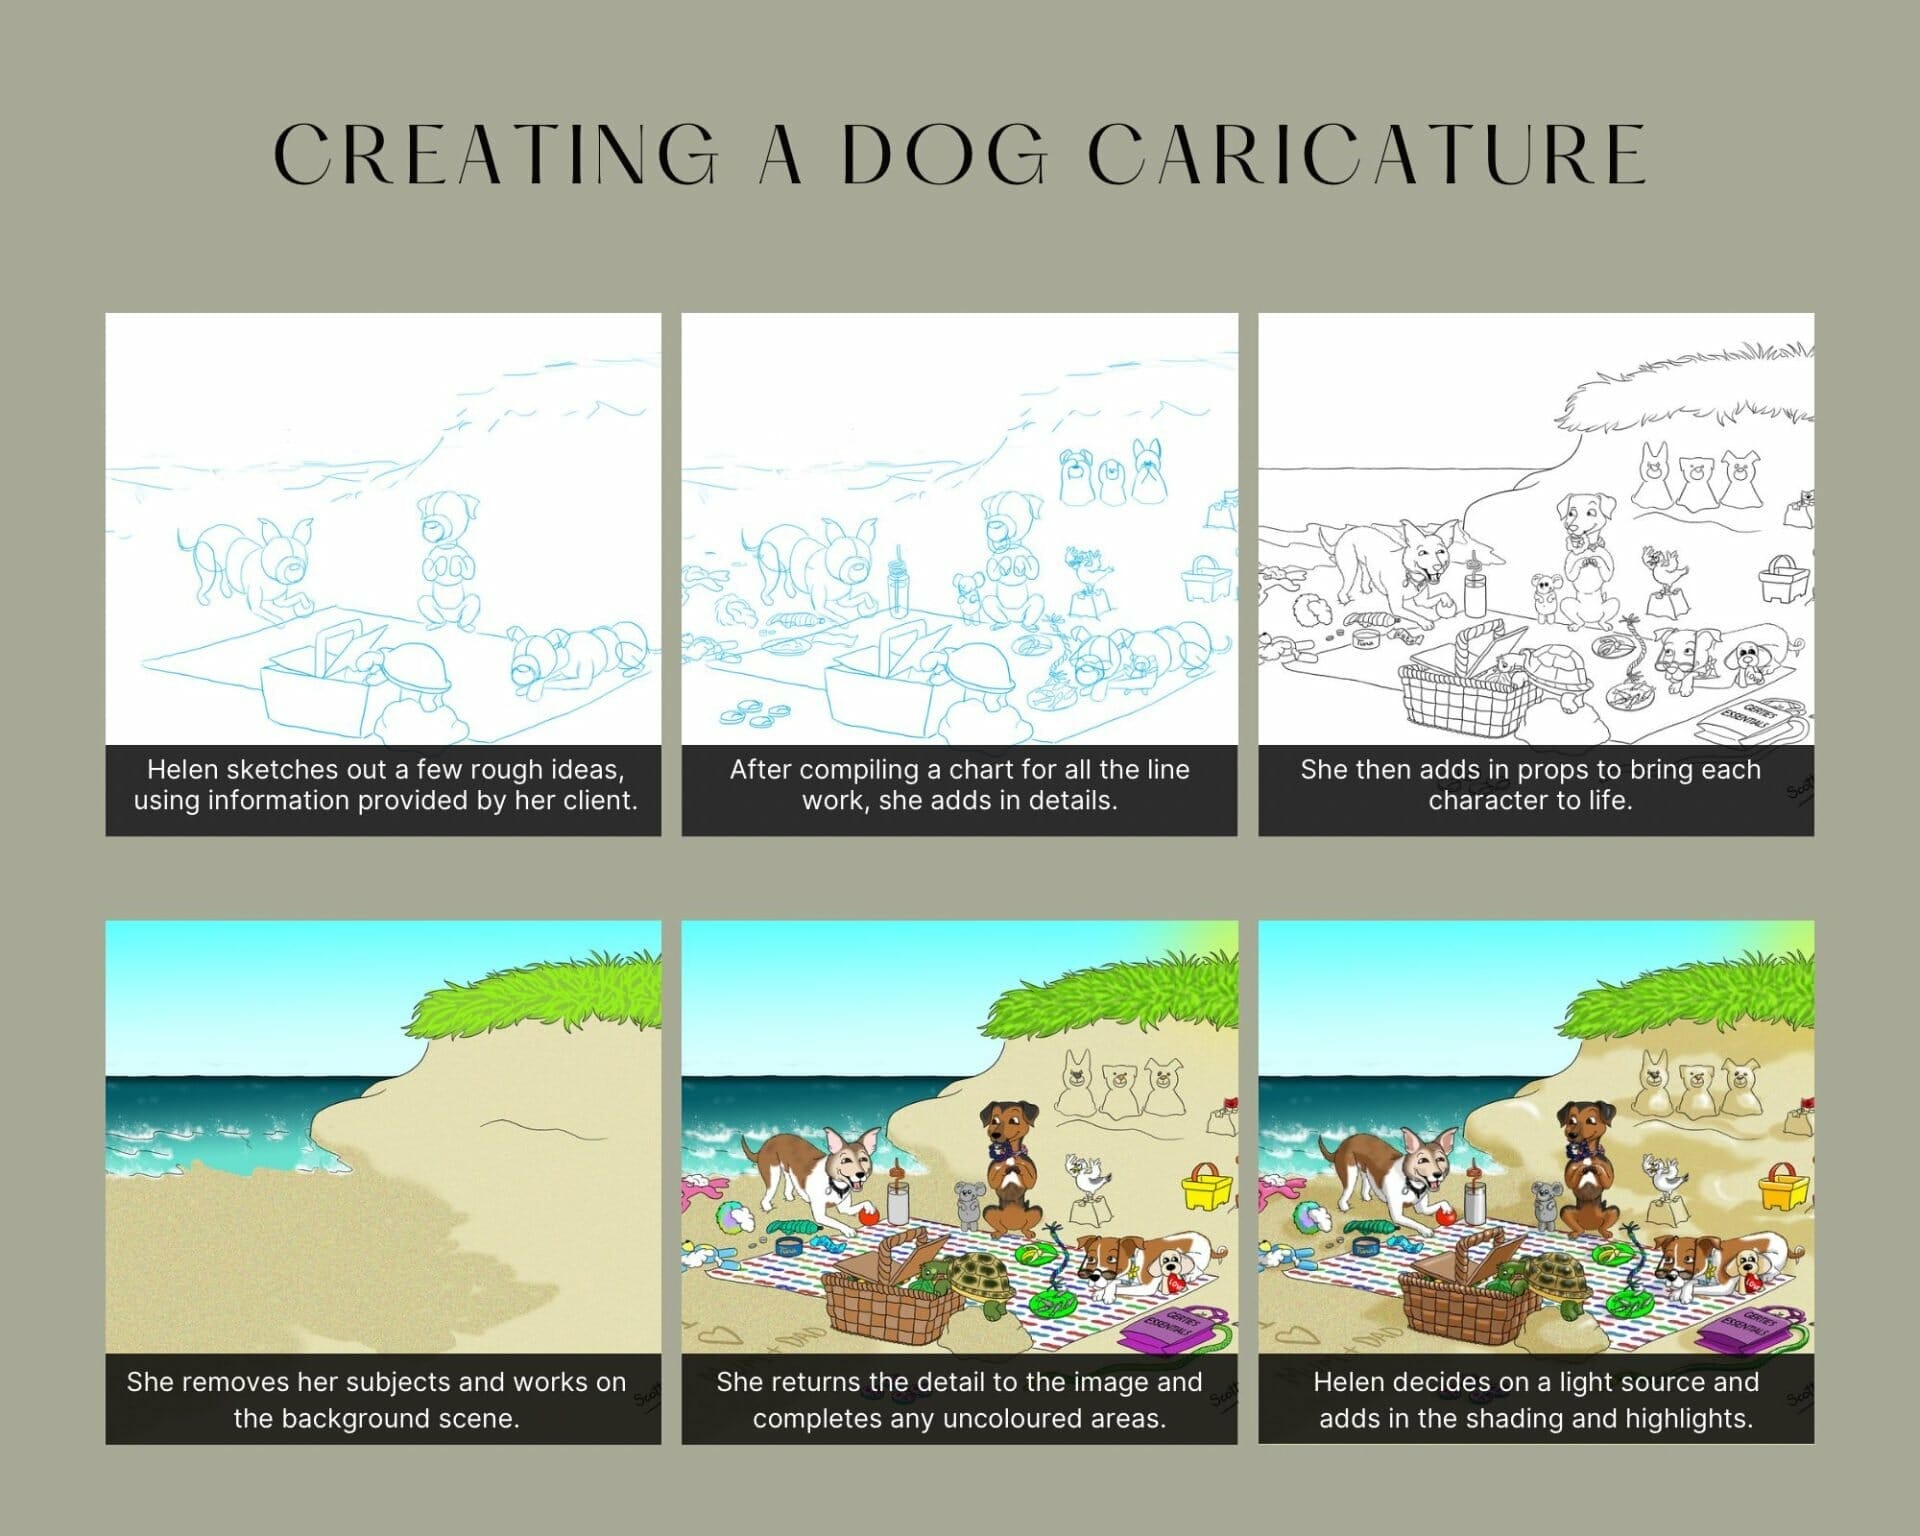 The Stages of Creating a Dog Caricature